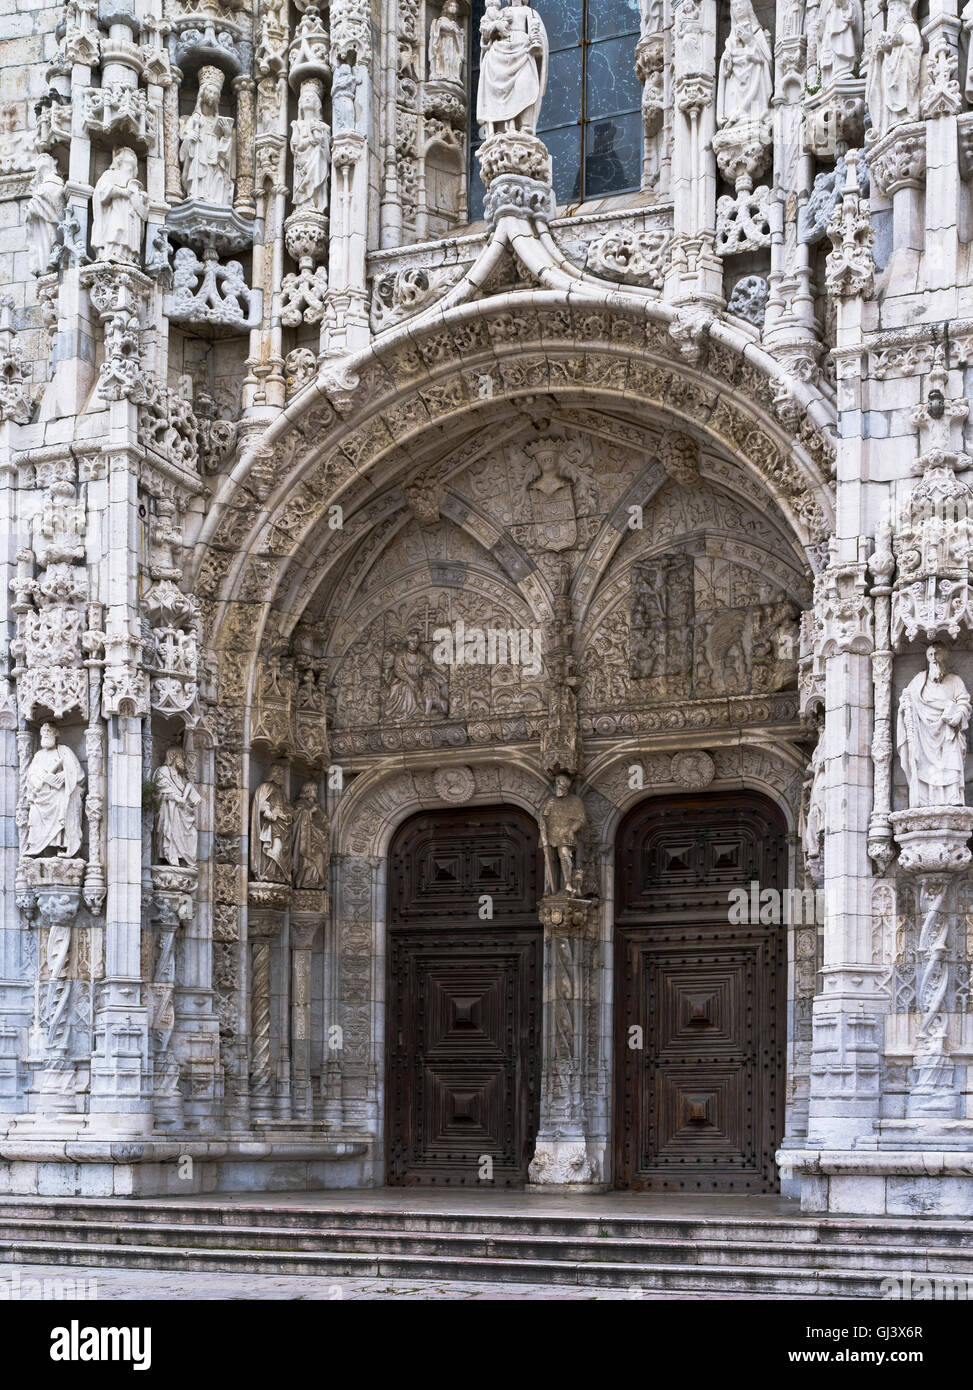 dh Belem LISBON PORTUGAL Ornate carving doors to Jeronimos Monastery in lisboa Stock Photo